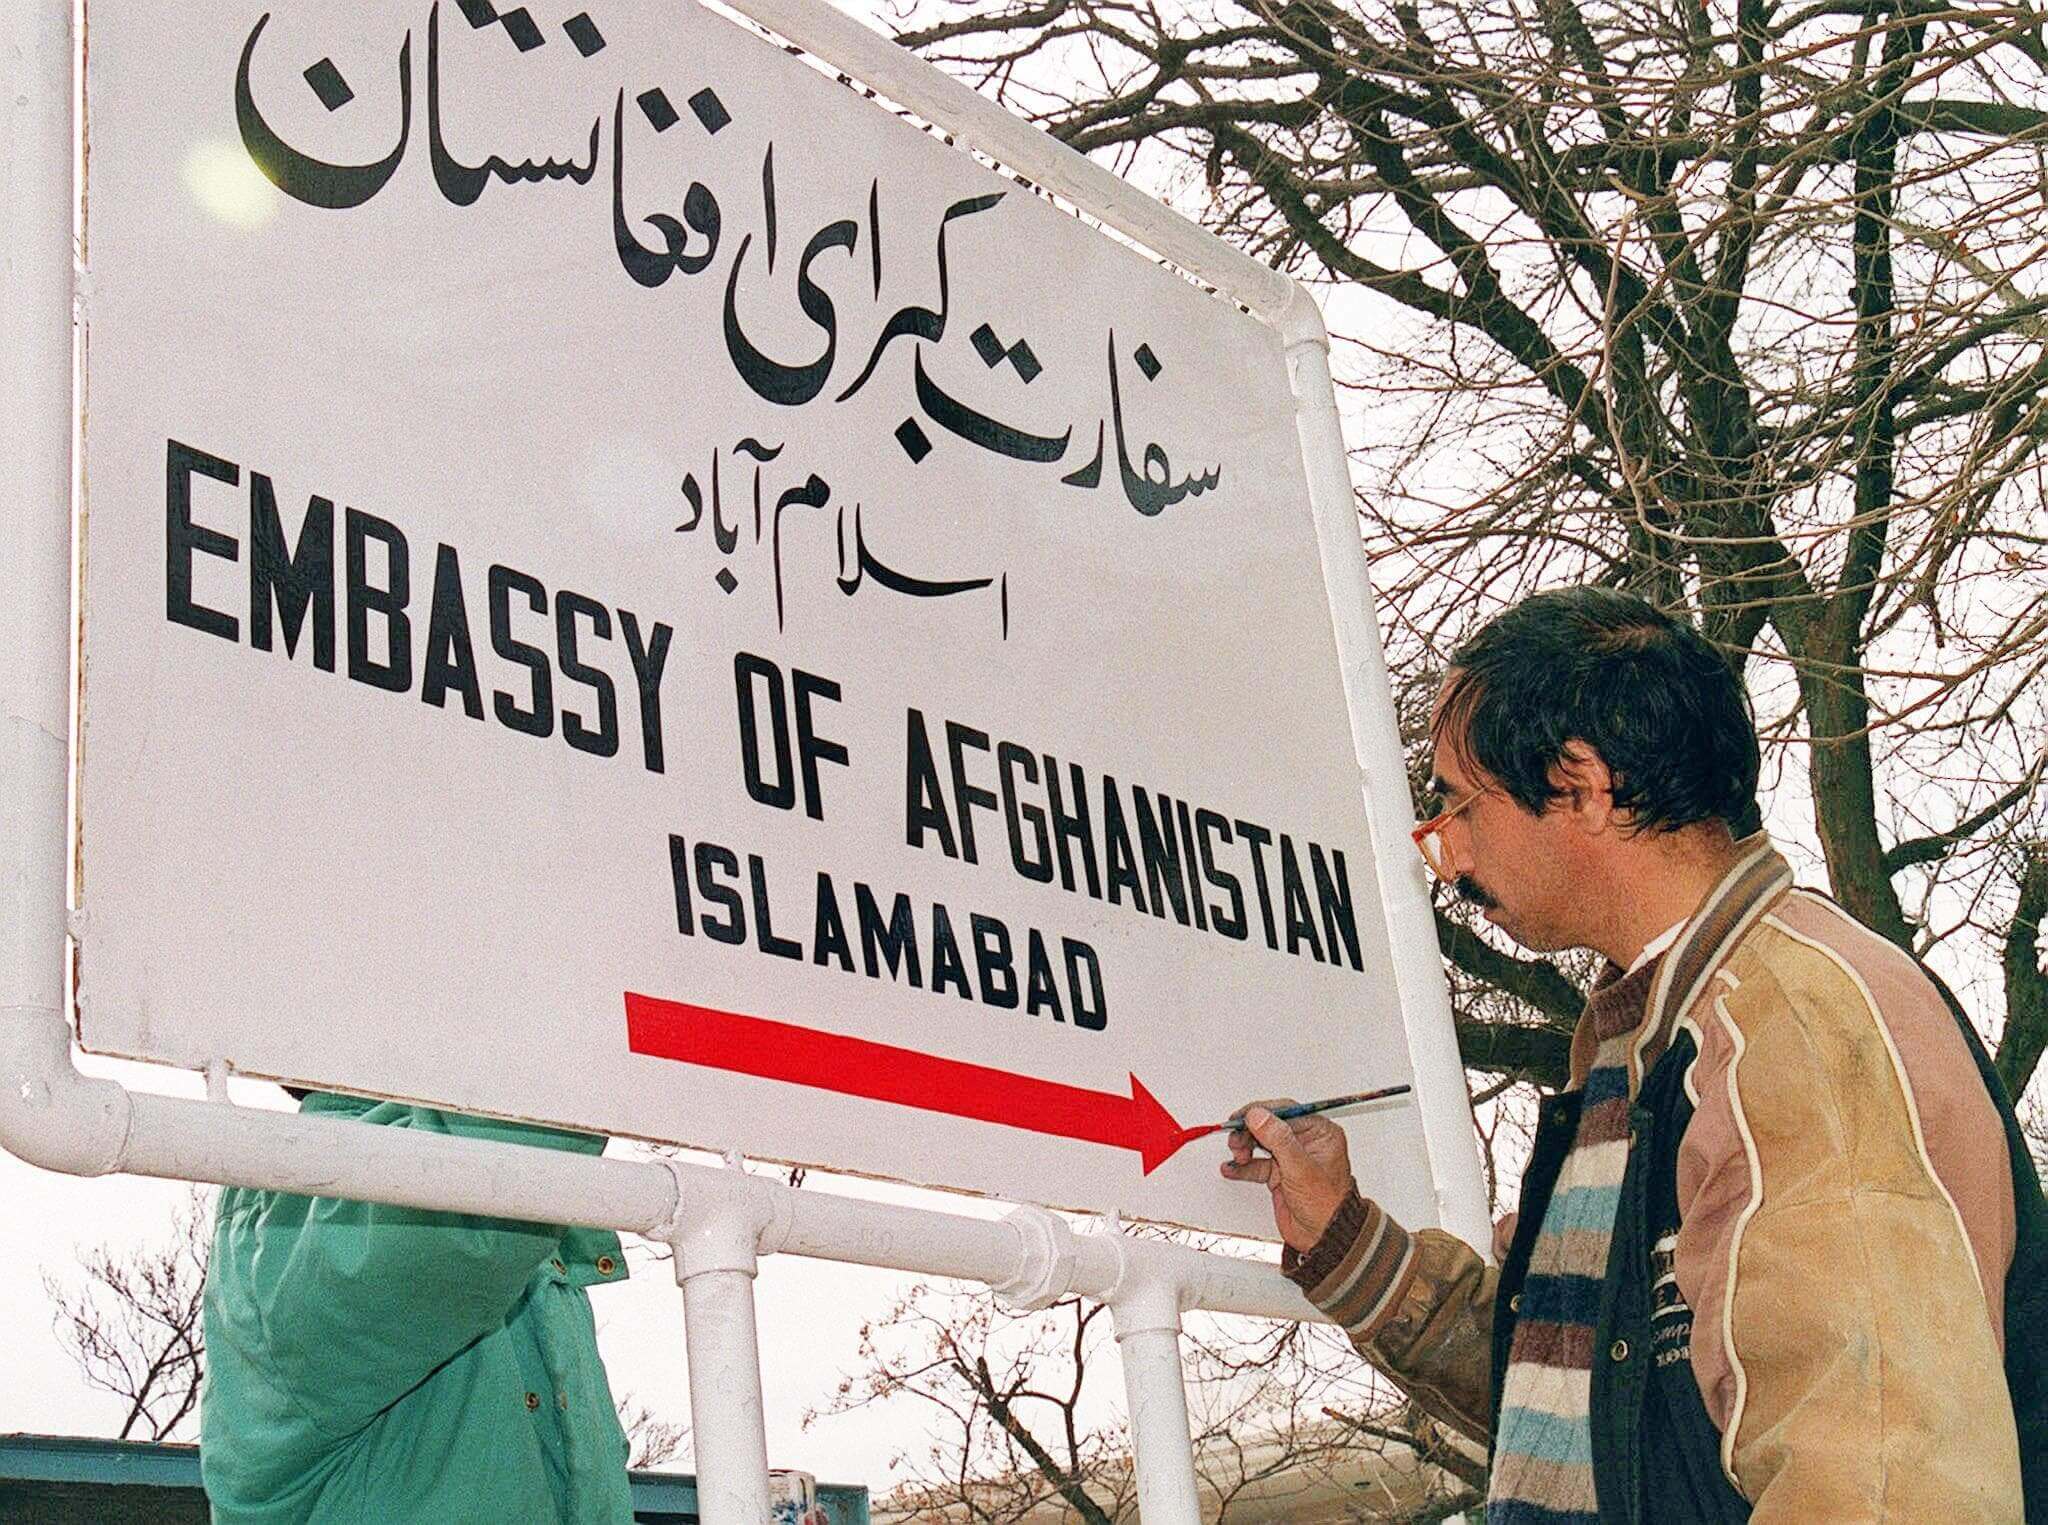 AFGHANISTAN-EMBASSY-DAUGHTER-ISLAMABAD-PAKISTAN-KIDNAPPING-NEWS-EASTERN-HERALD